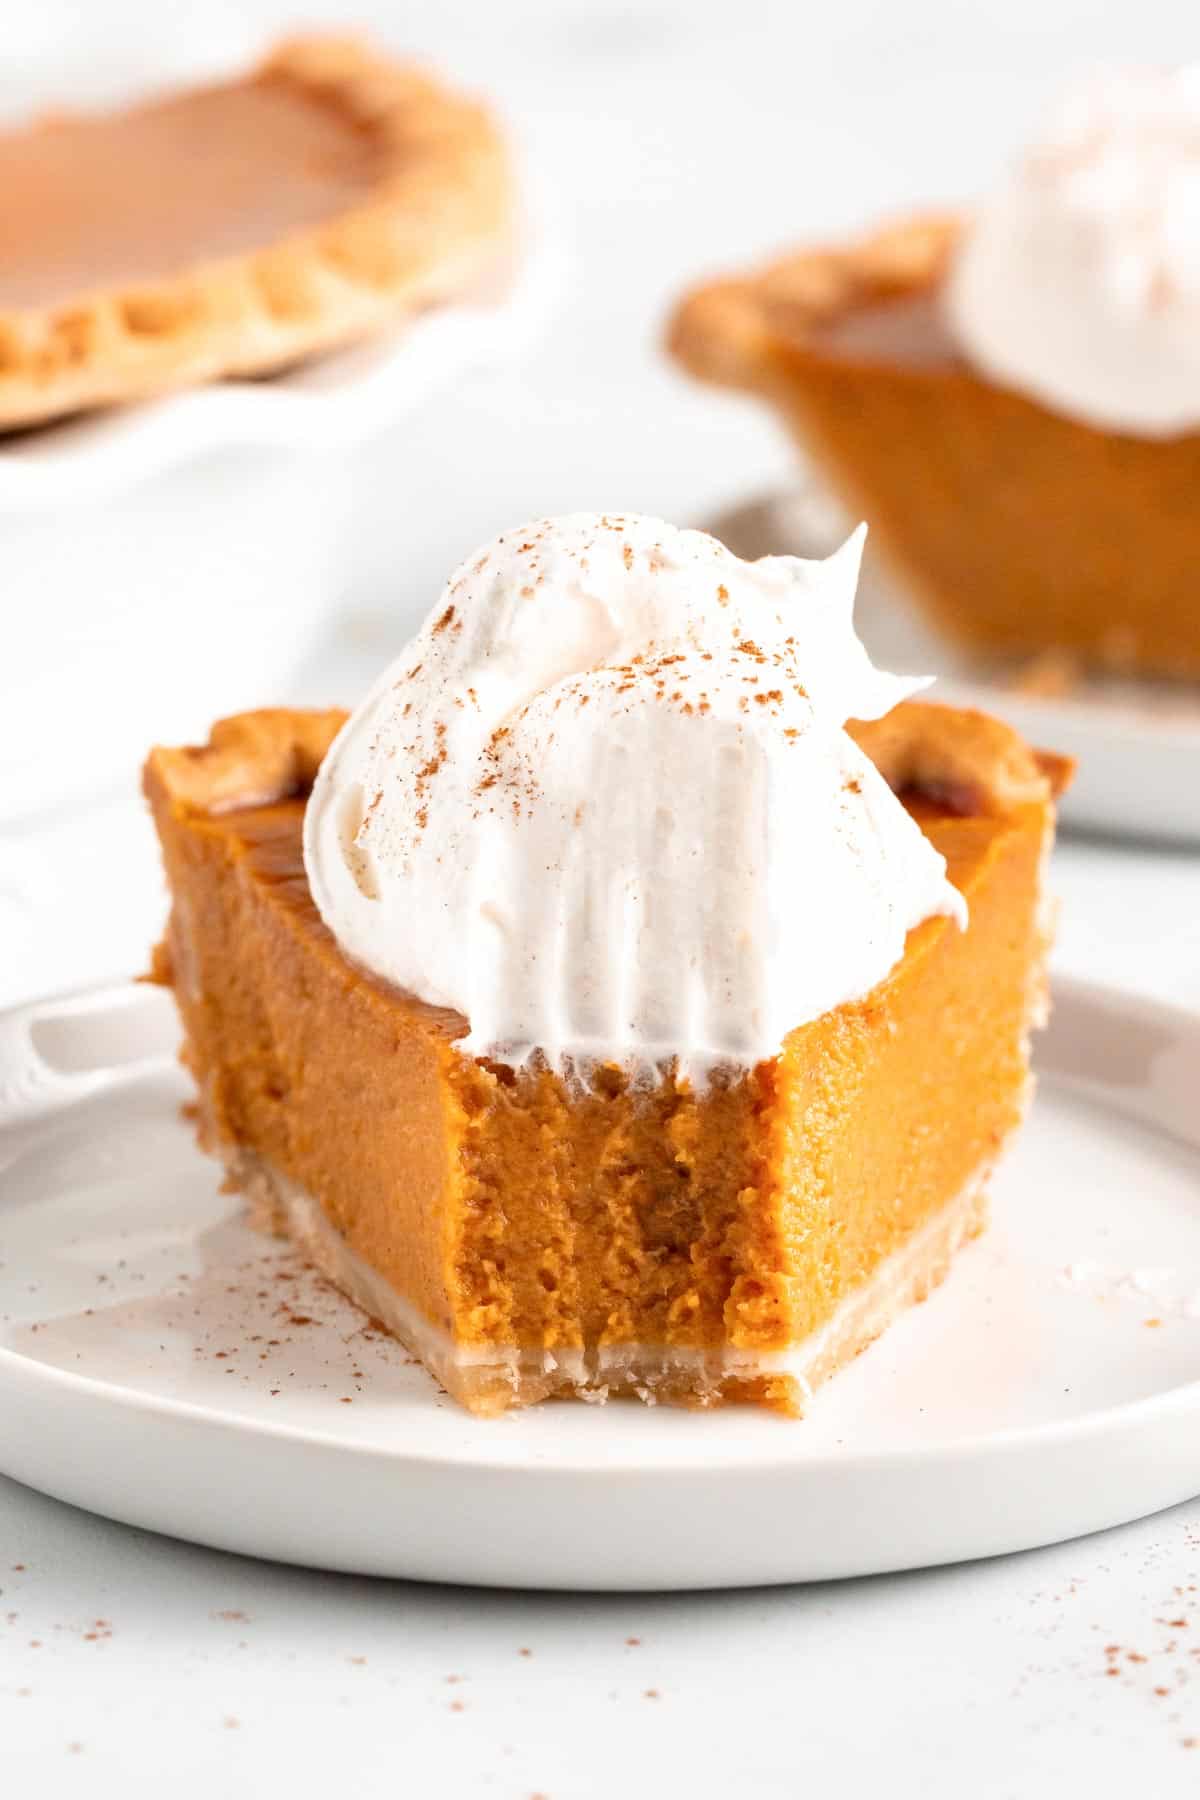 Pumpkin pie with whipped cream on white plate.